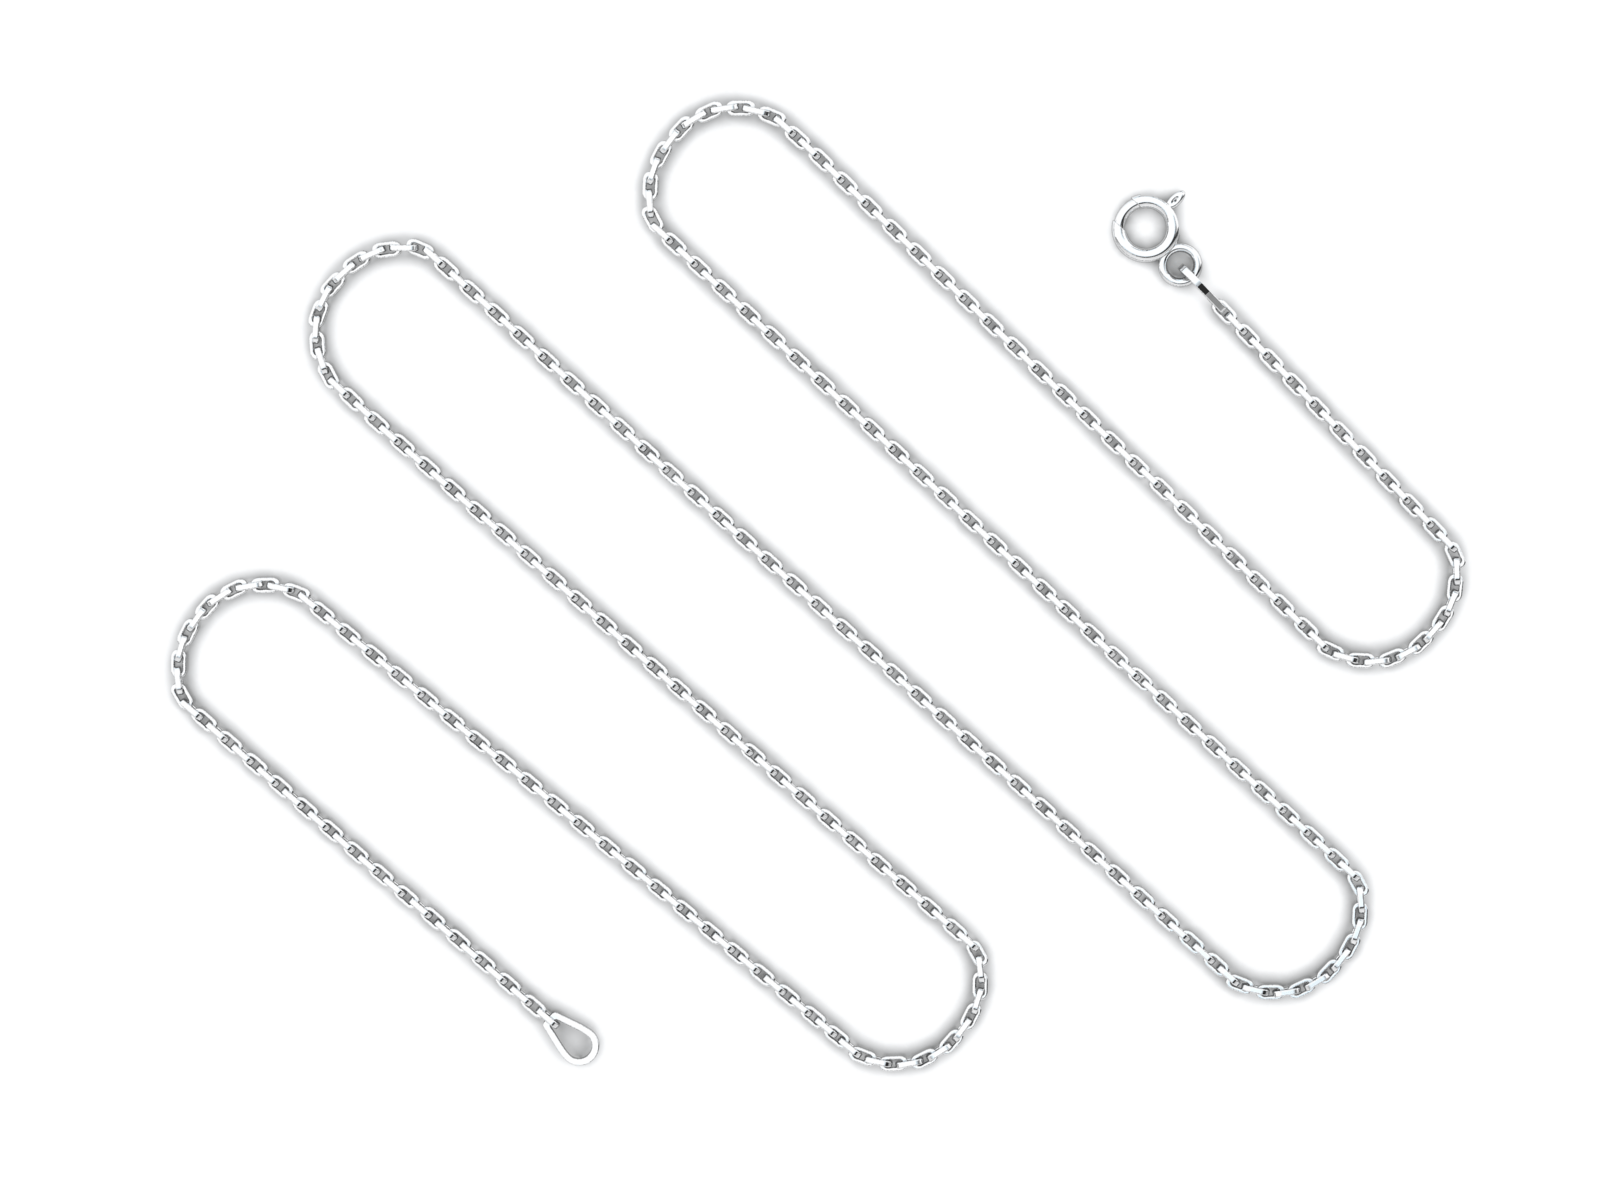 Cable Light (1.2mm) Sterling Silver Chain, 16", 18", 20", 24", 30"